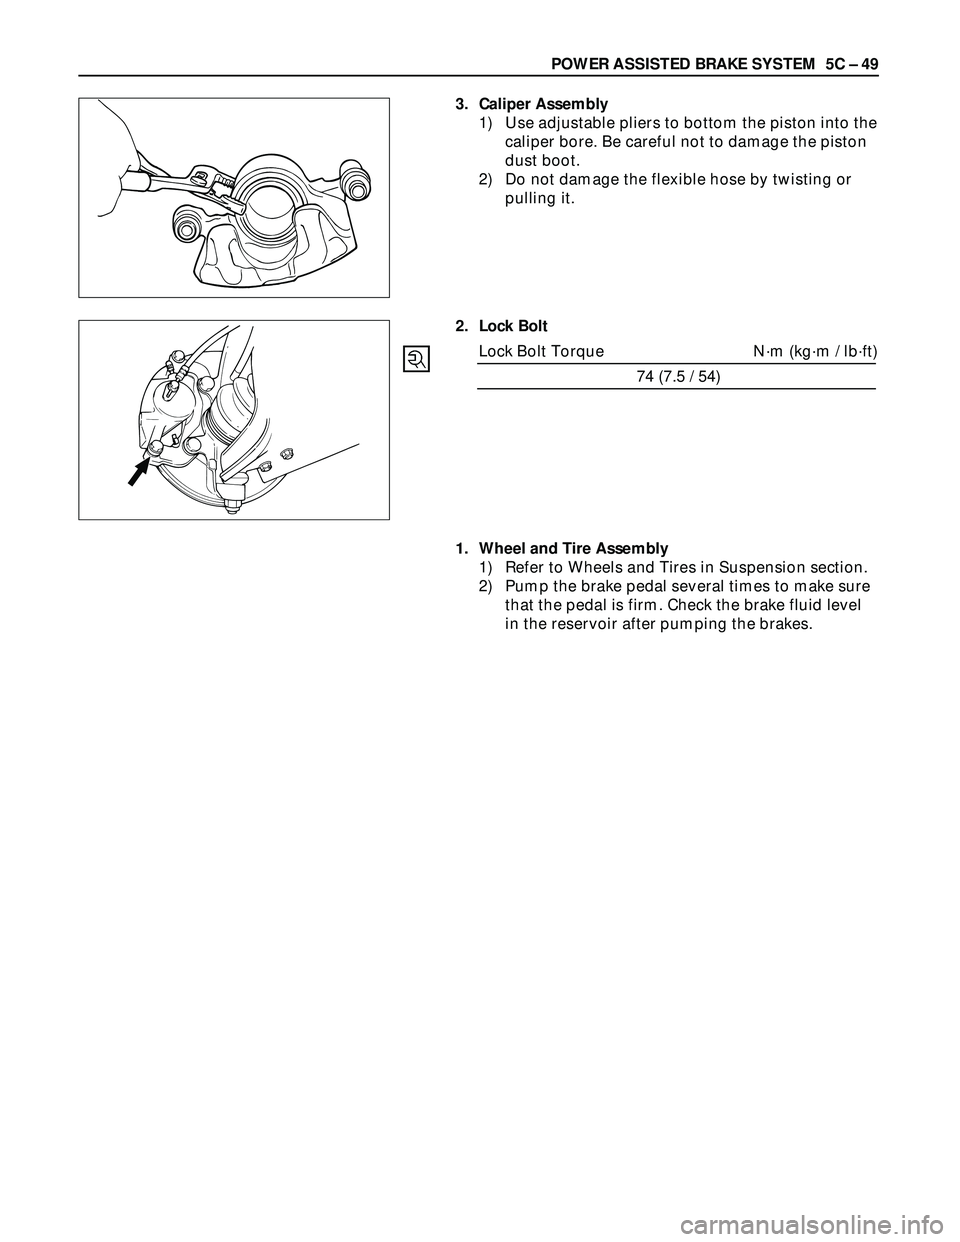 ISUZU TROOPER 1998  Service Service Manual POWER ASSISTED BRAKE SYSTEM  5C – 49
3. Caliper Assembly
1) Use adjustable pliers to bottom the piston into the
caliper bore. Be careful not to damage the piston
dust boot.
2) Do not damage the flex